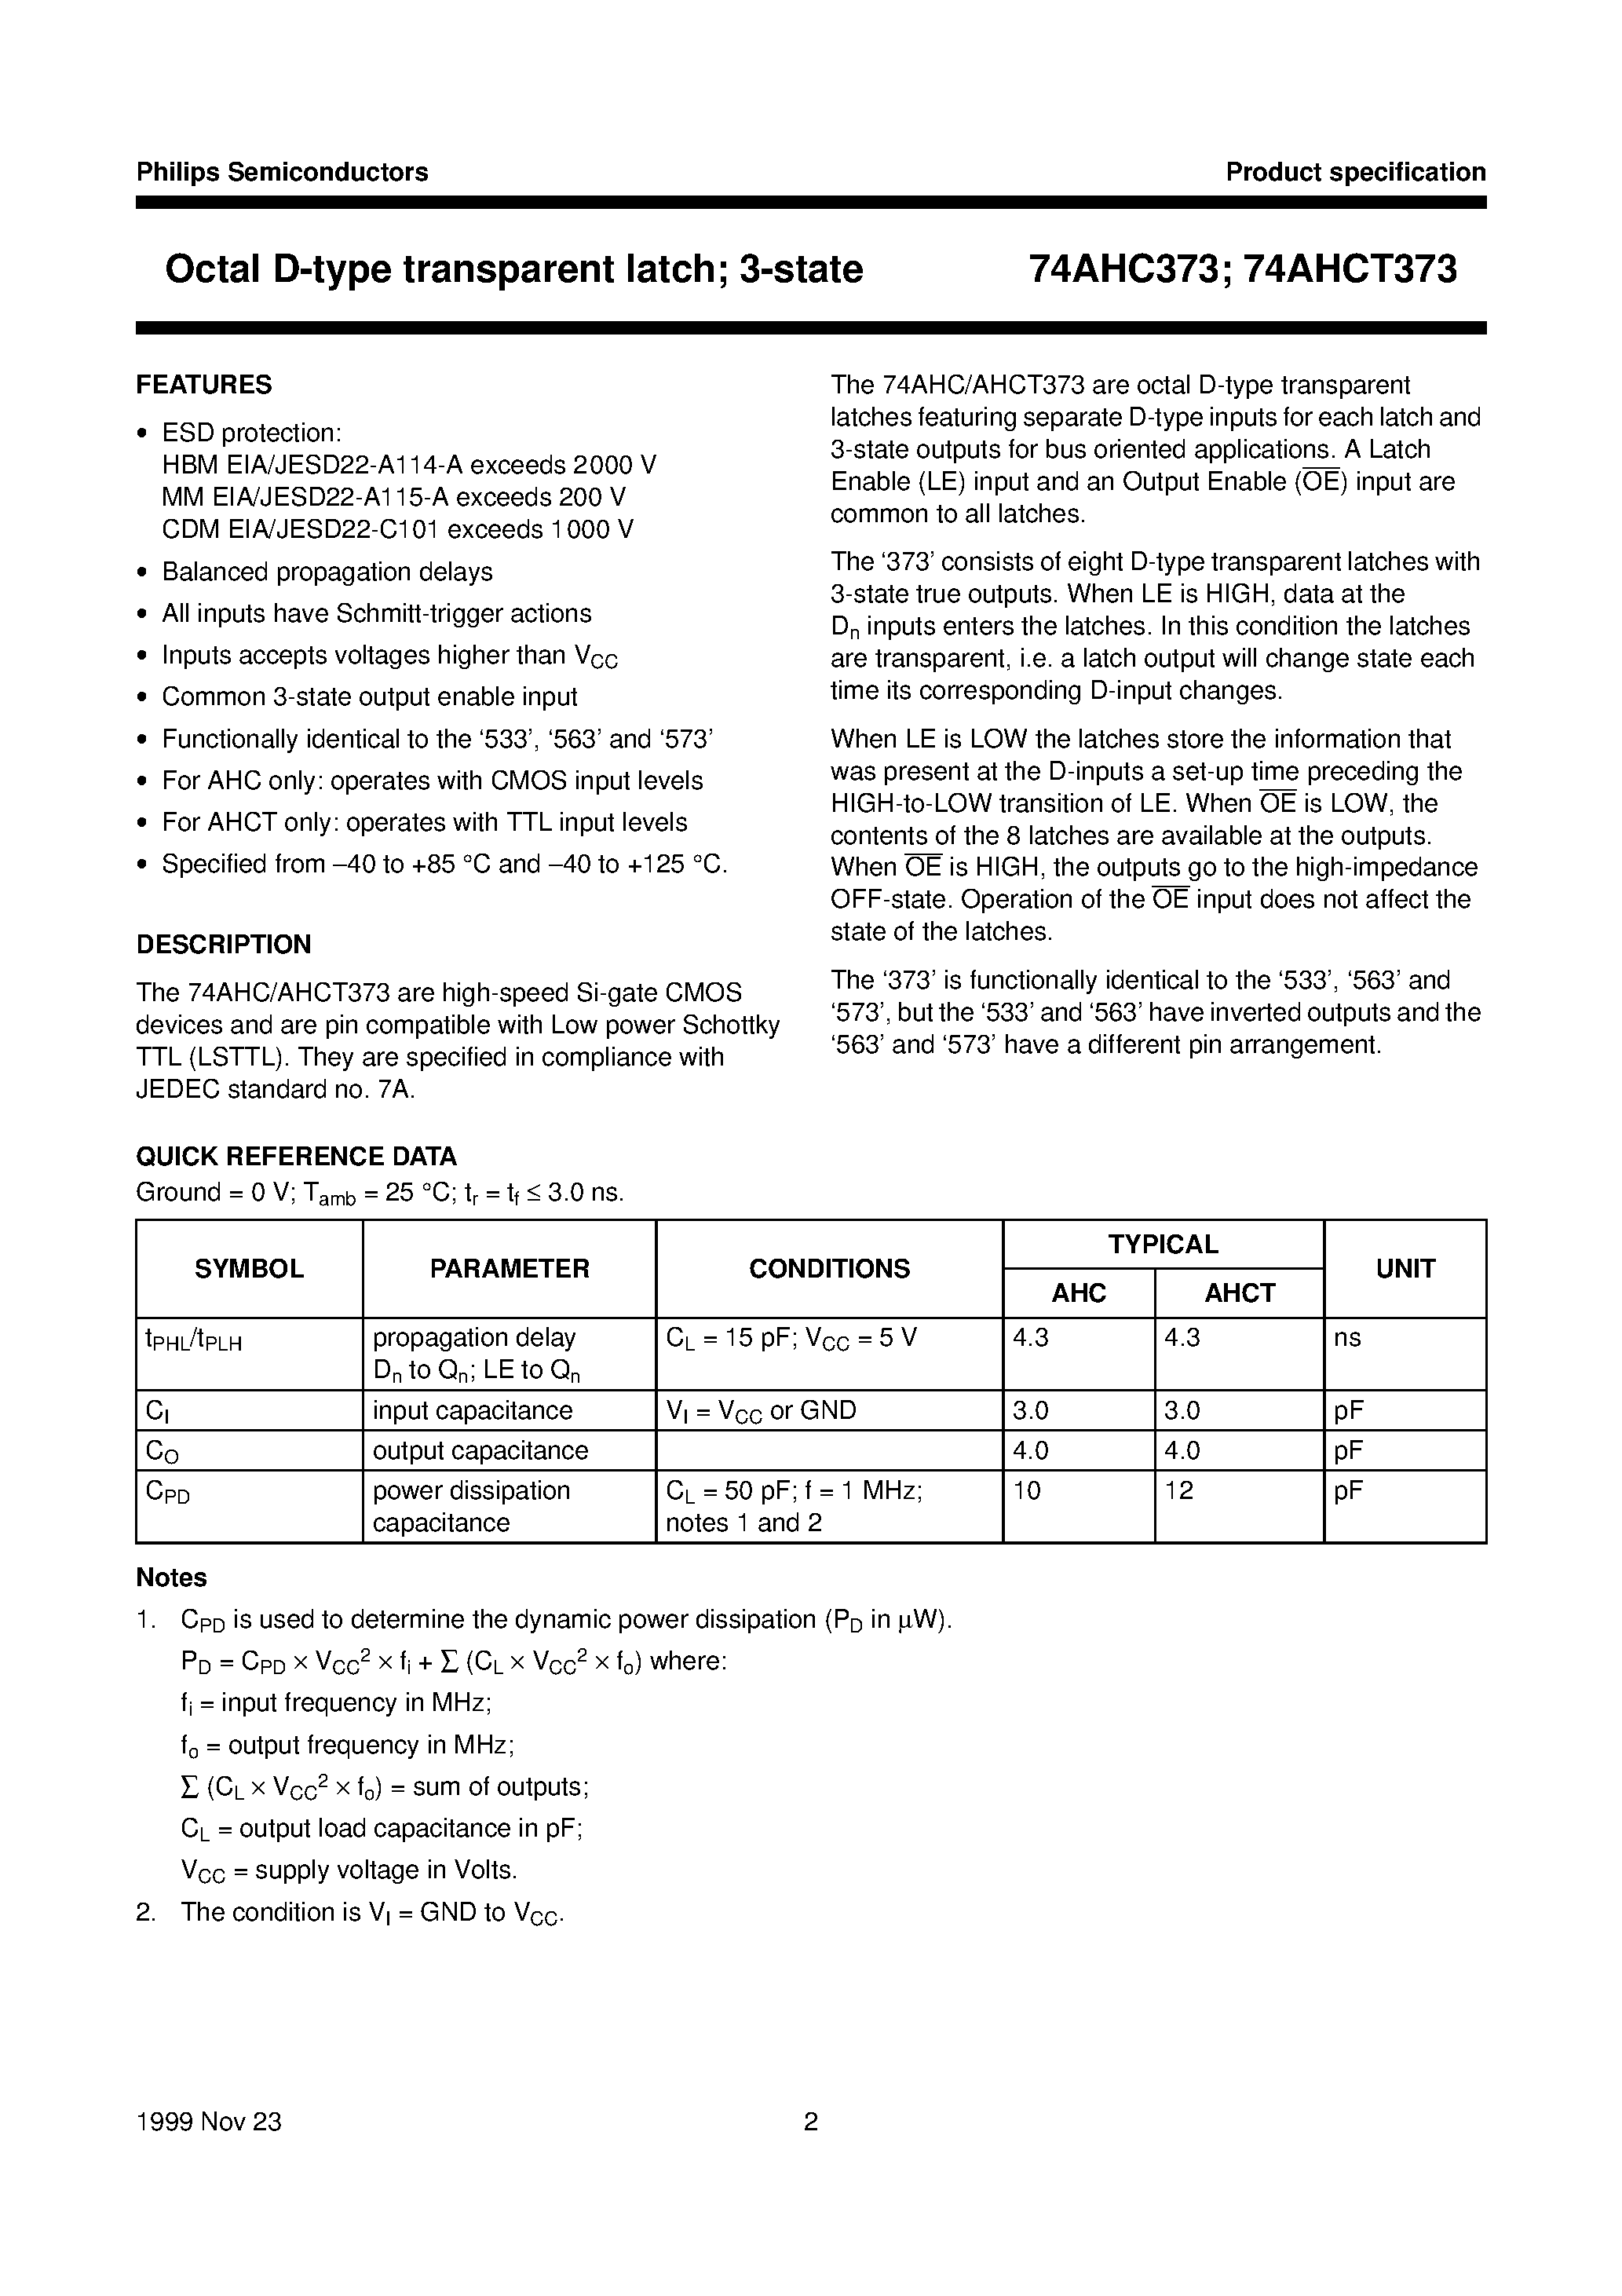 Datasheet 74AHCT373PW - Octal D-type transparent latch; 3-state page 2